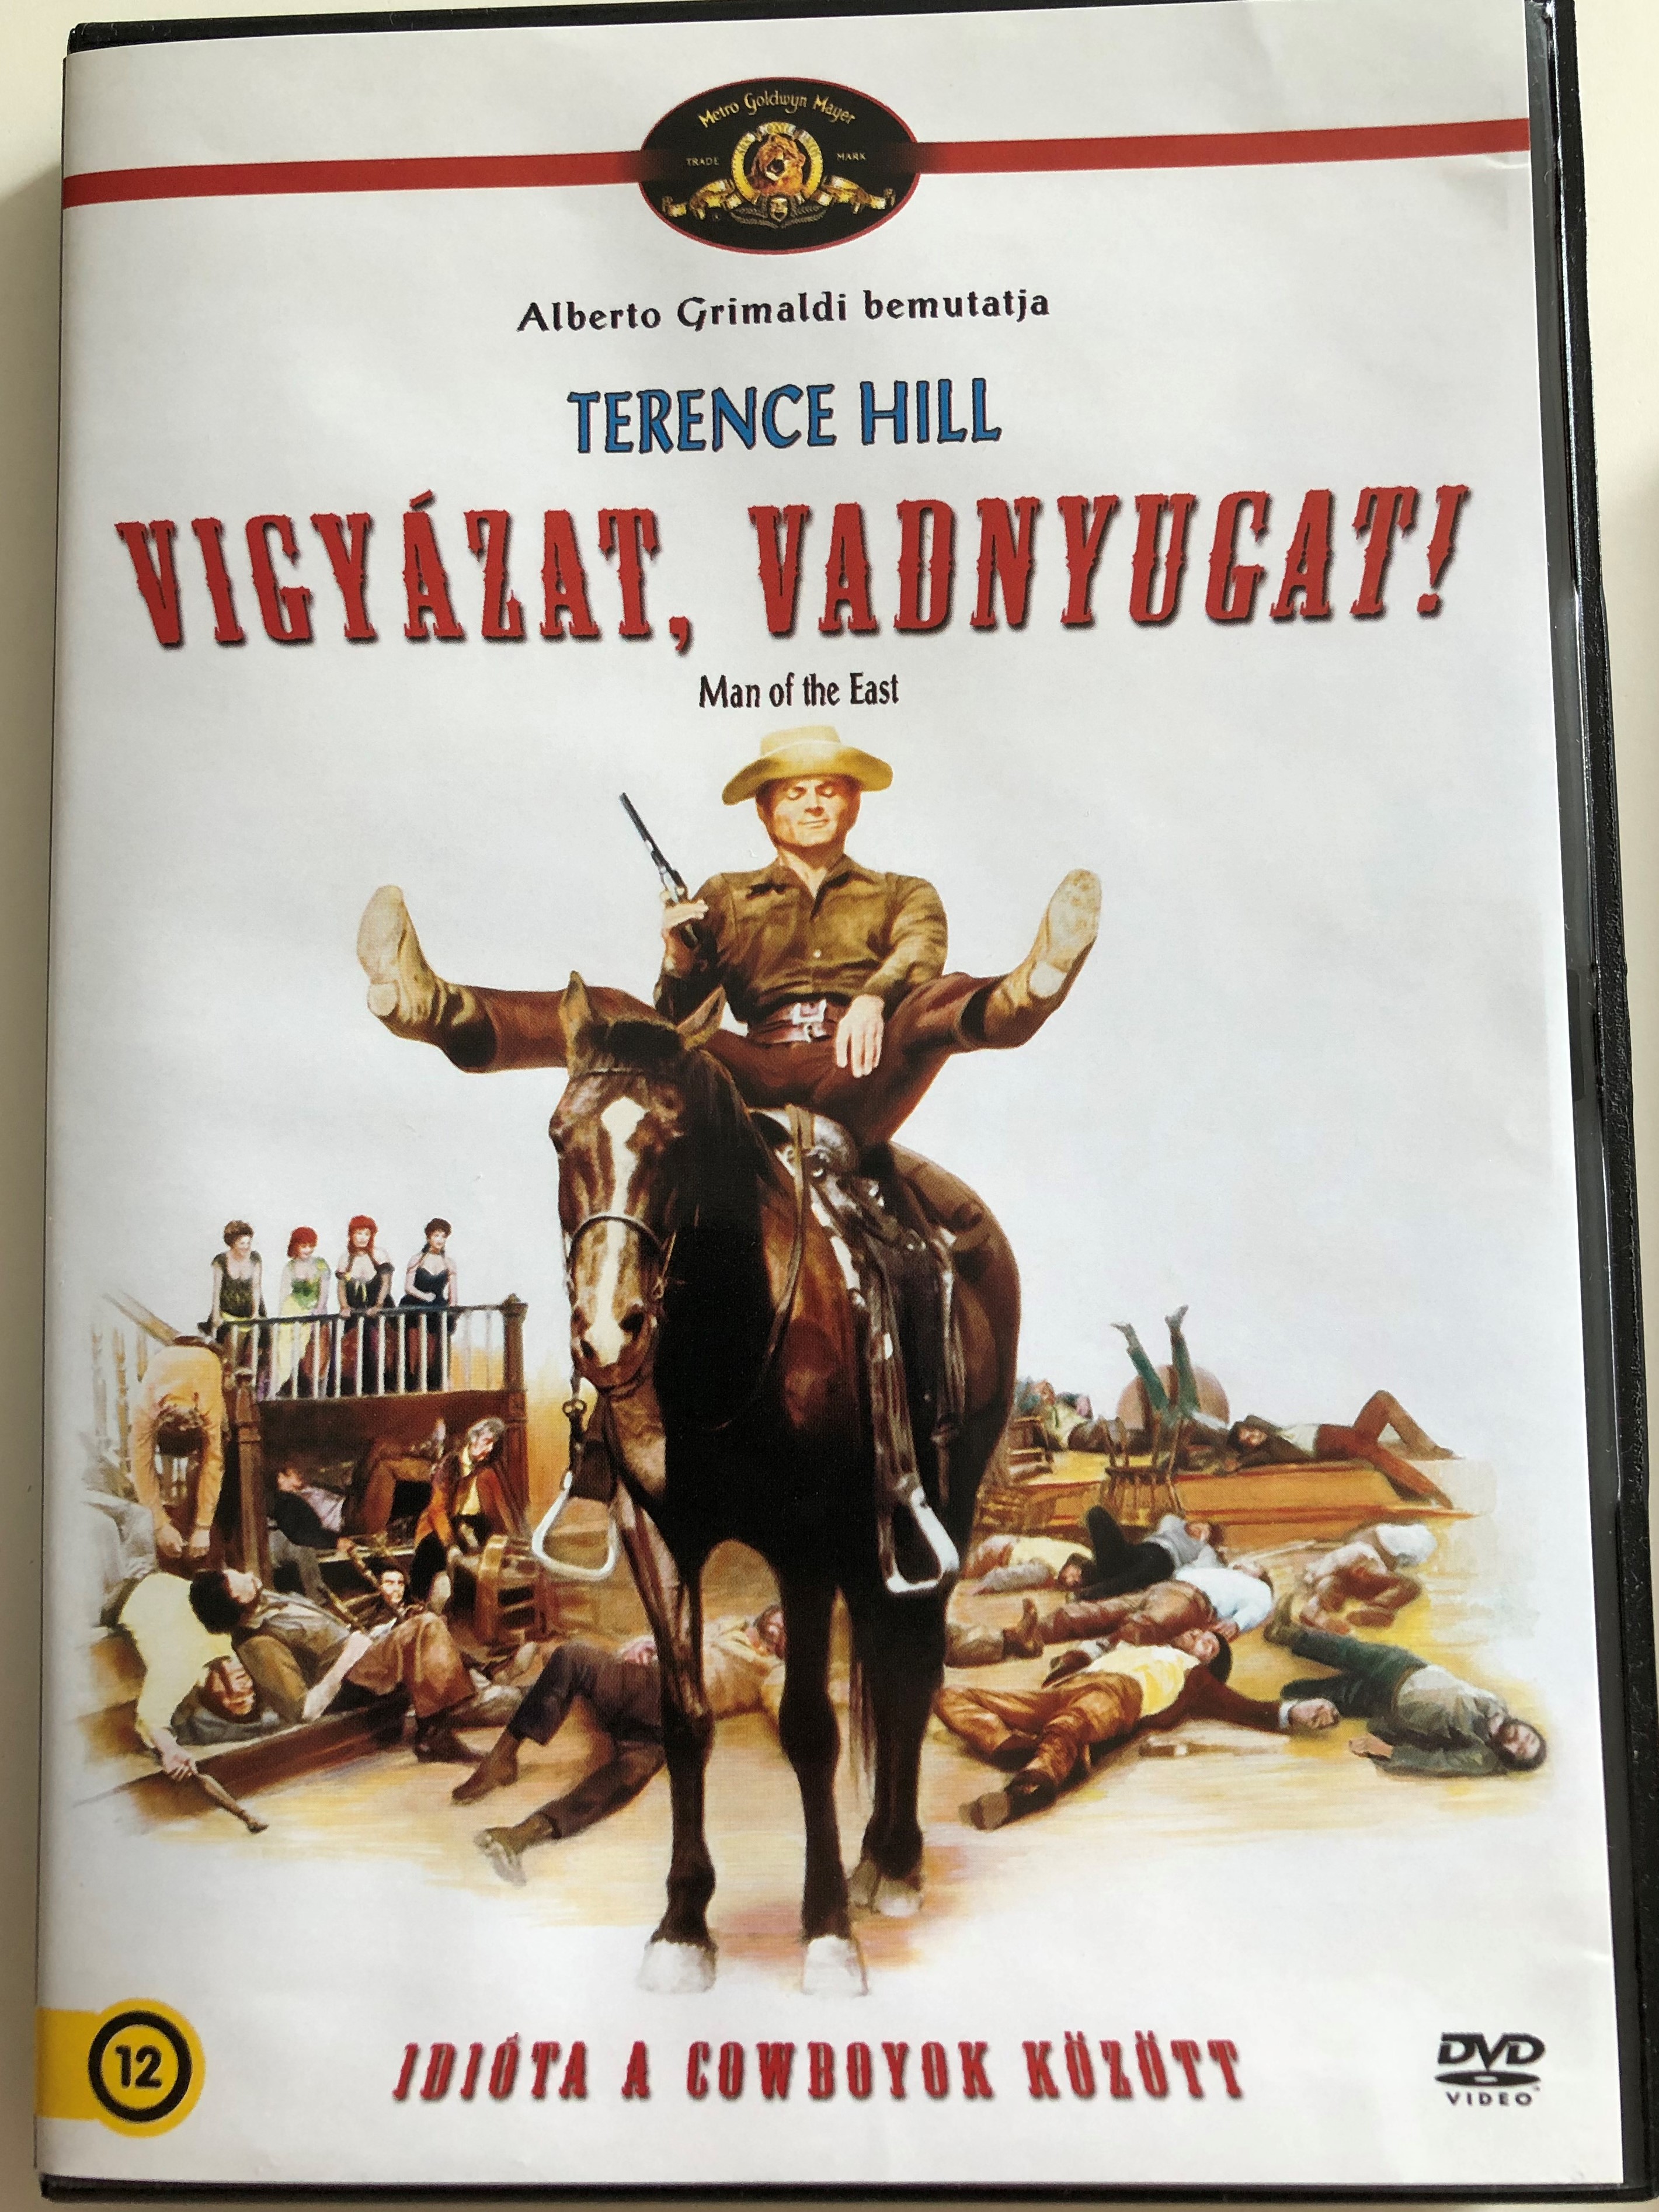 man-of-the-east-dvd-1972-vigy-zat-vadnyugat-...e-poi-lo-chiamarono-il-magnifico-directed-by-e.b.-clucher-starring-terence-hill-gregory-walcott-1-.jpg